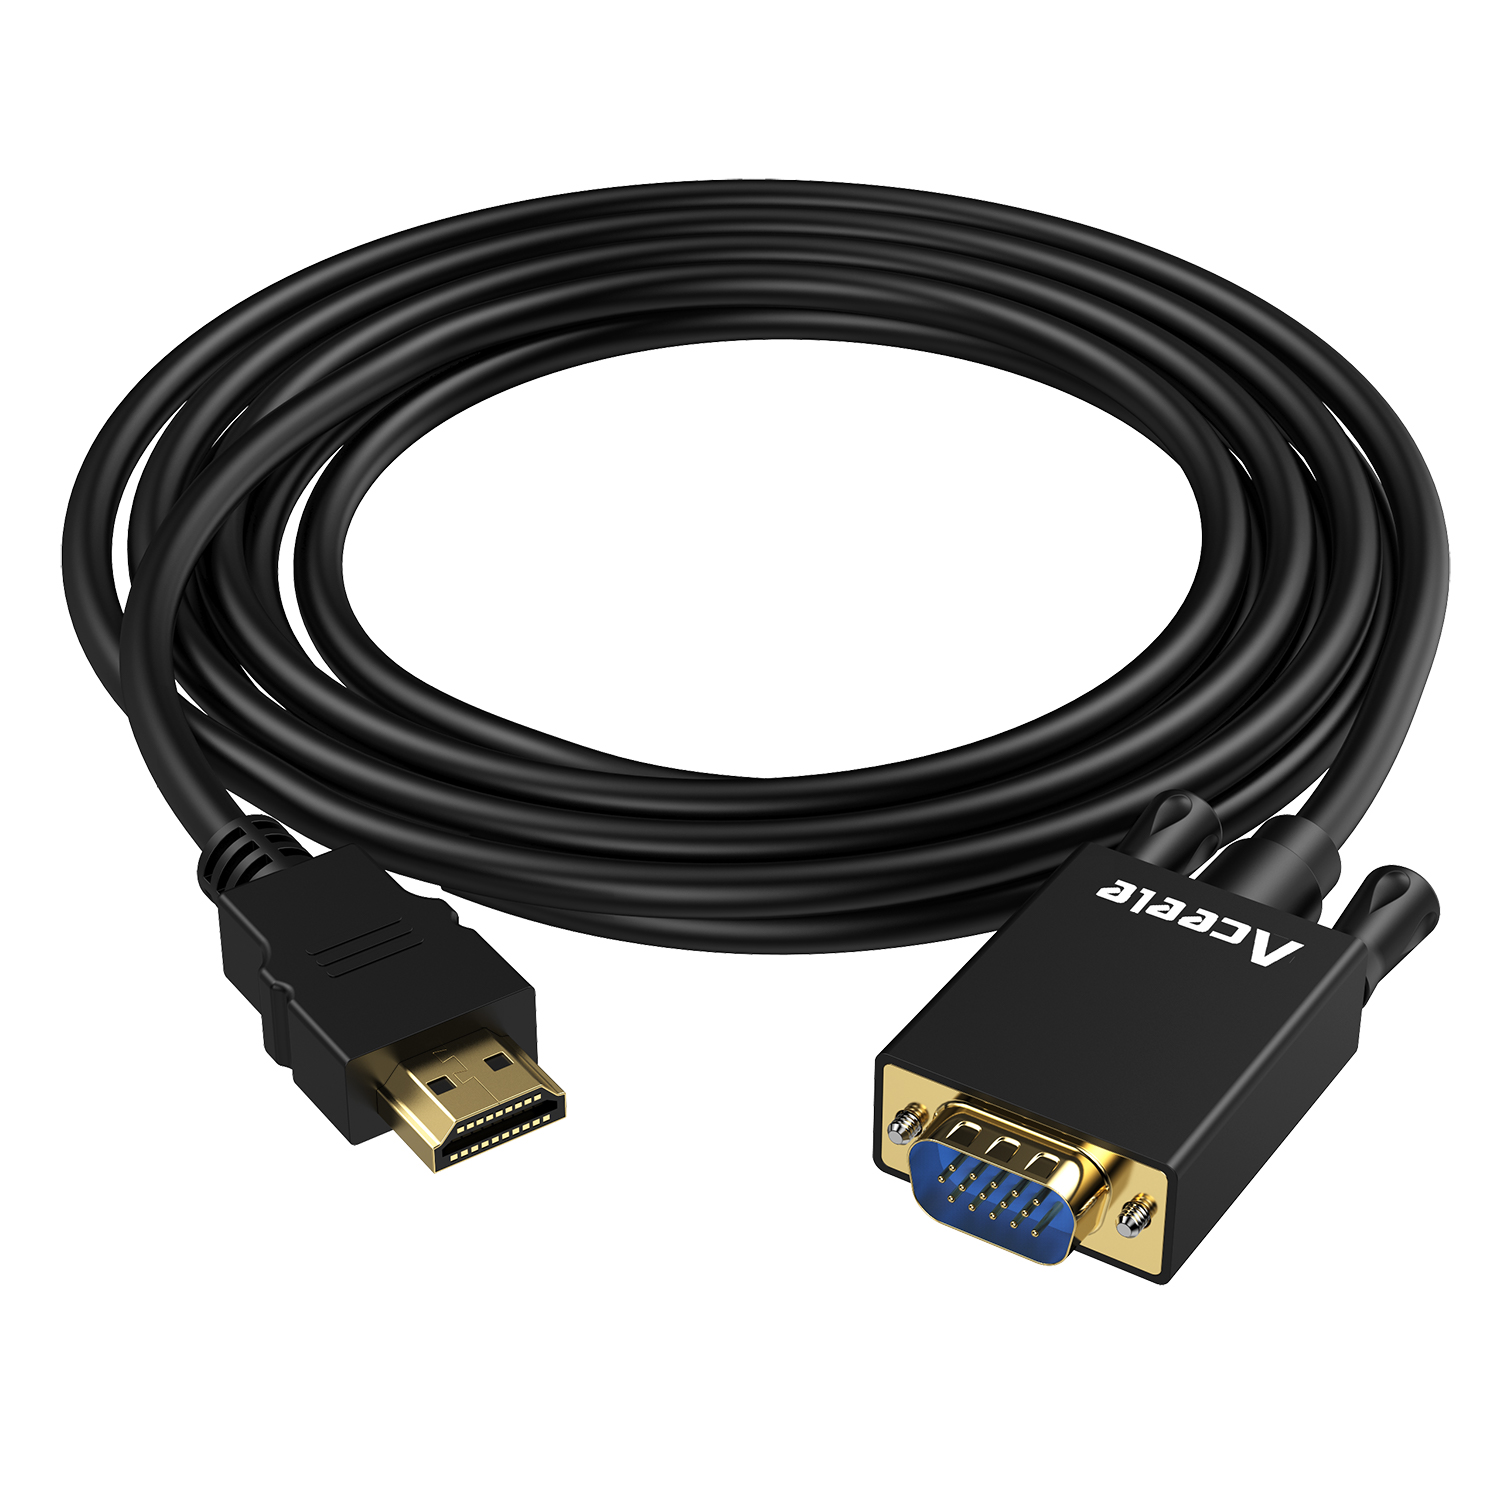 03-90358 HDMI to VGA Cable Adapter, Aceele Gold-Plated HDMI Male to VGA Male Converter with 7ft Long Cable Cord Compatible for Computer, Desktop, Laptop, PC, Monitor, Projector, HDTV, Xbox